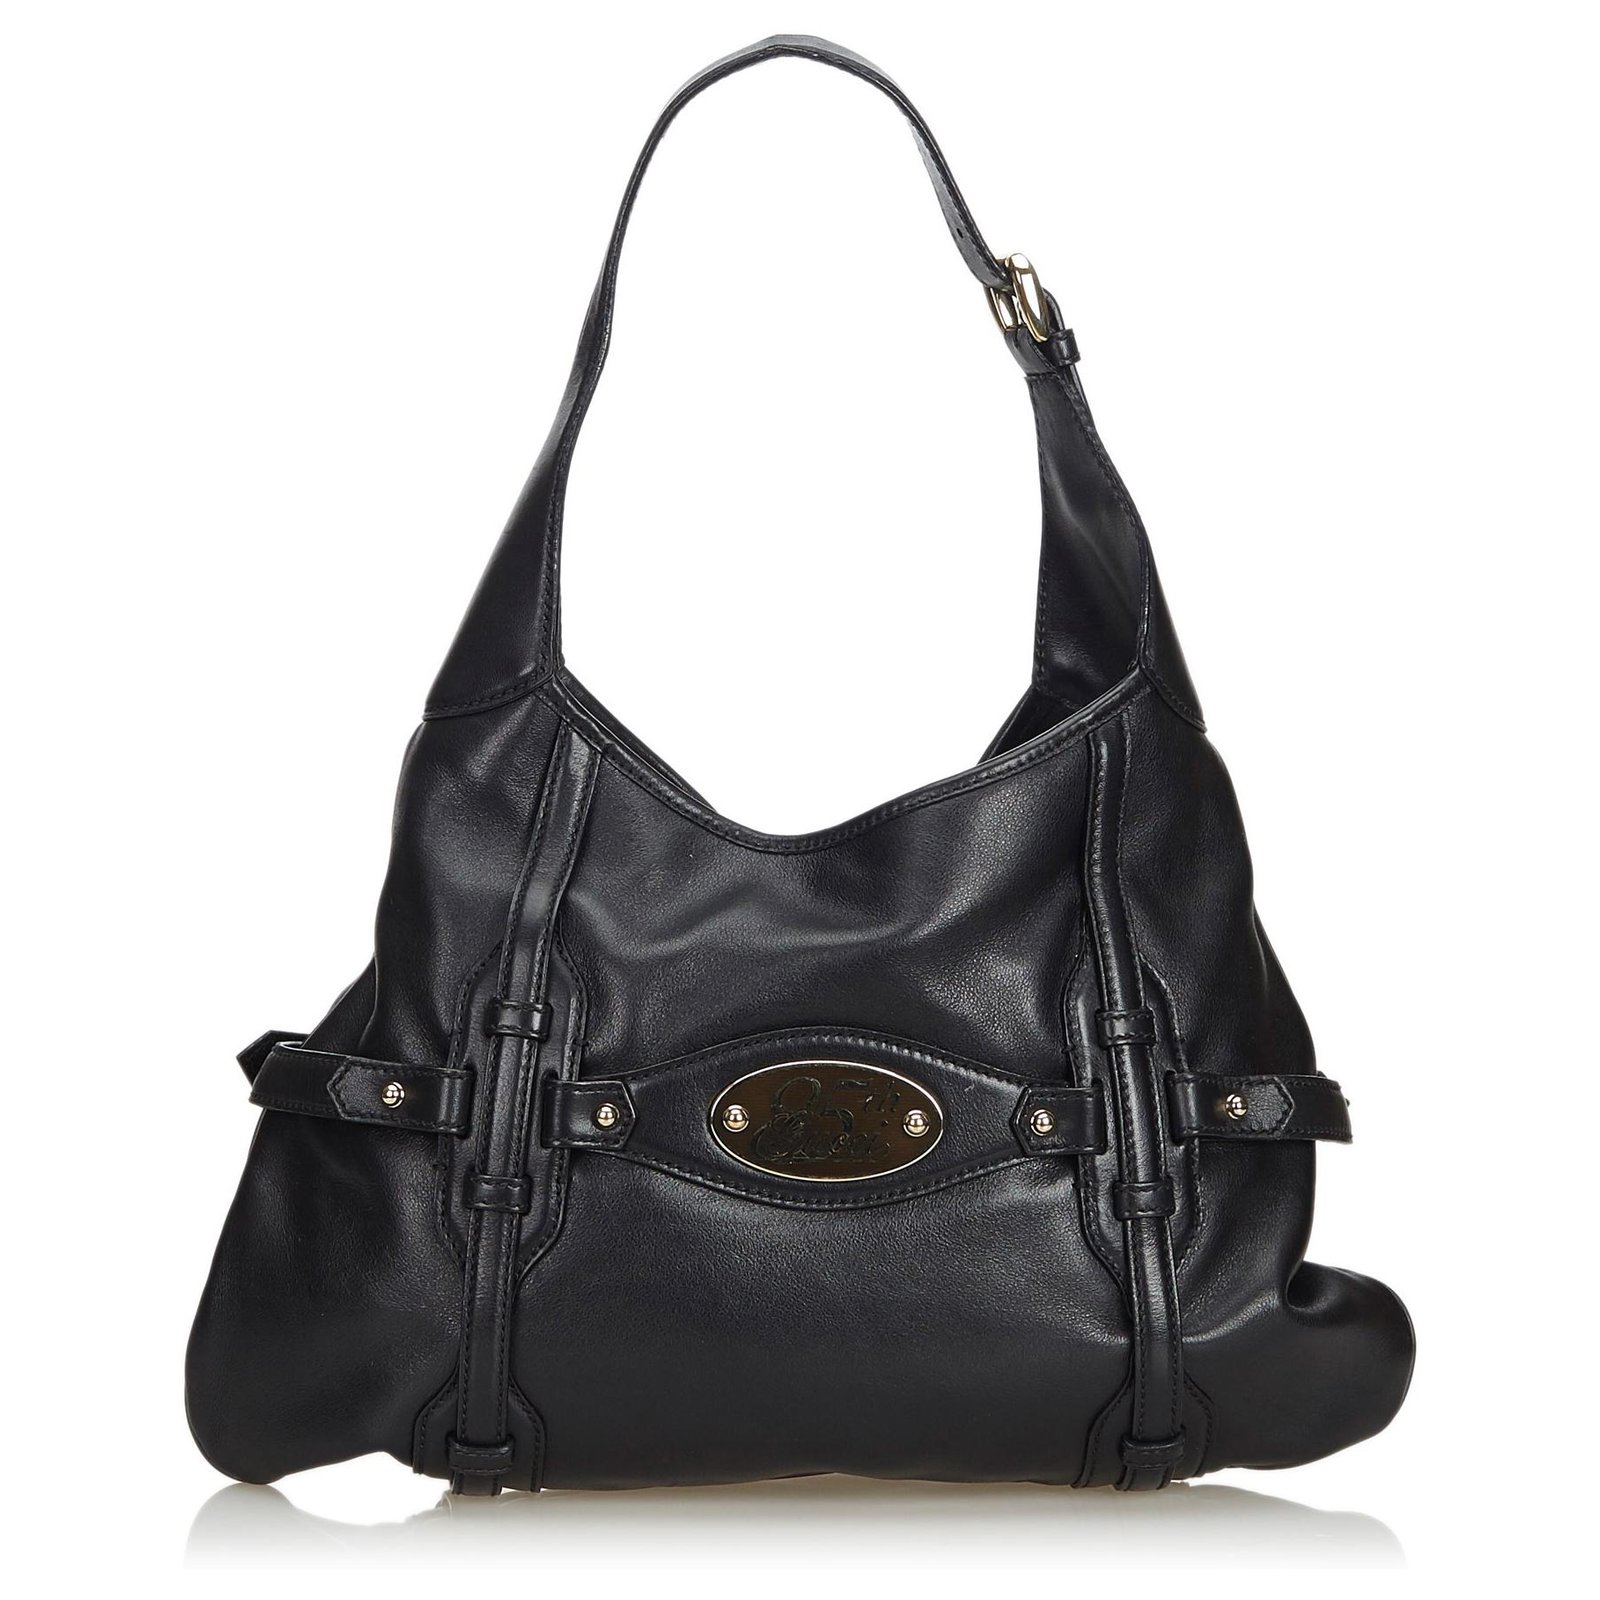 Gucci Black Leather Horsebit Hobo Bag with Silver Hardware.